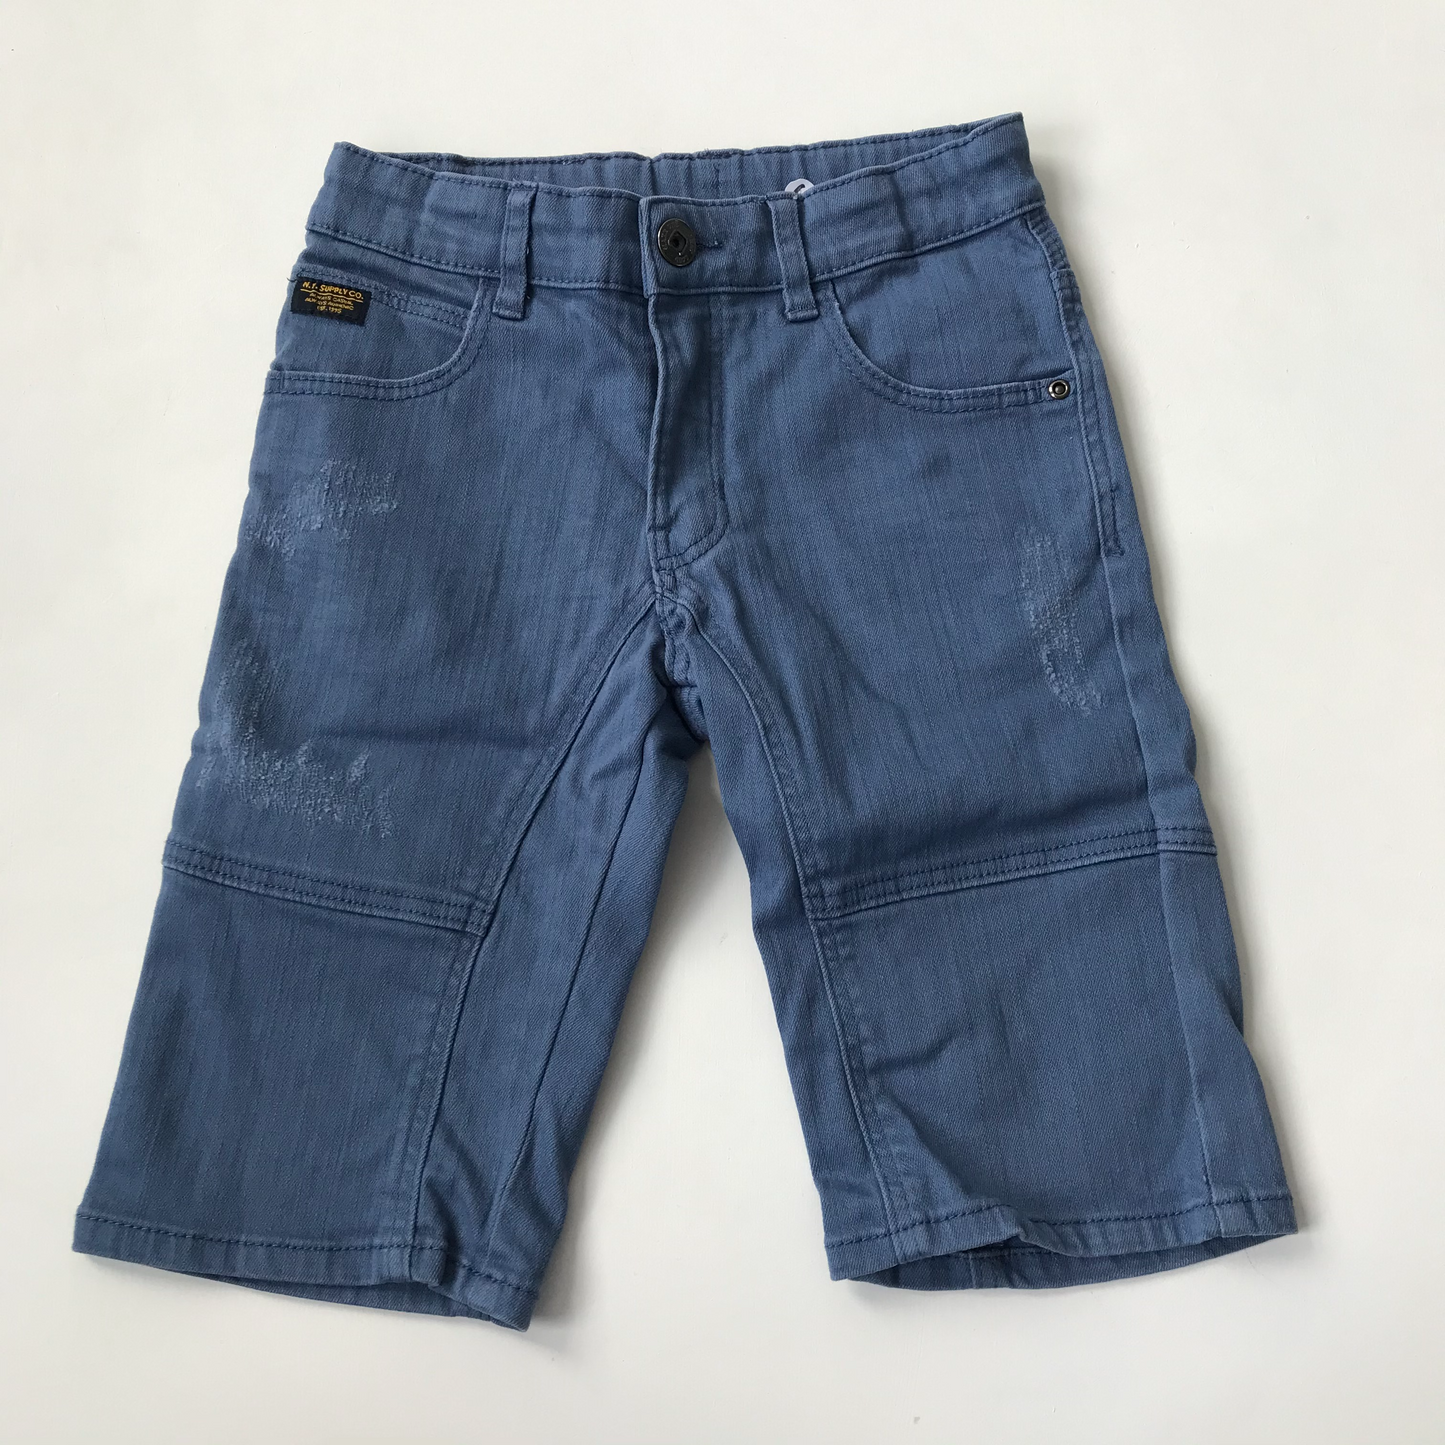 Shorts - Denim Style Ripped Details - Age 6